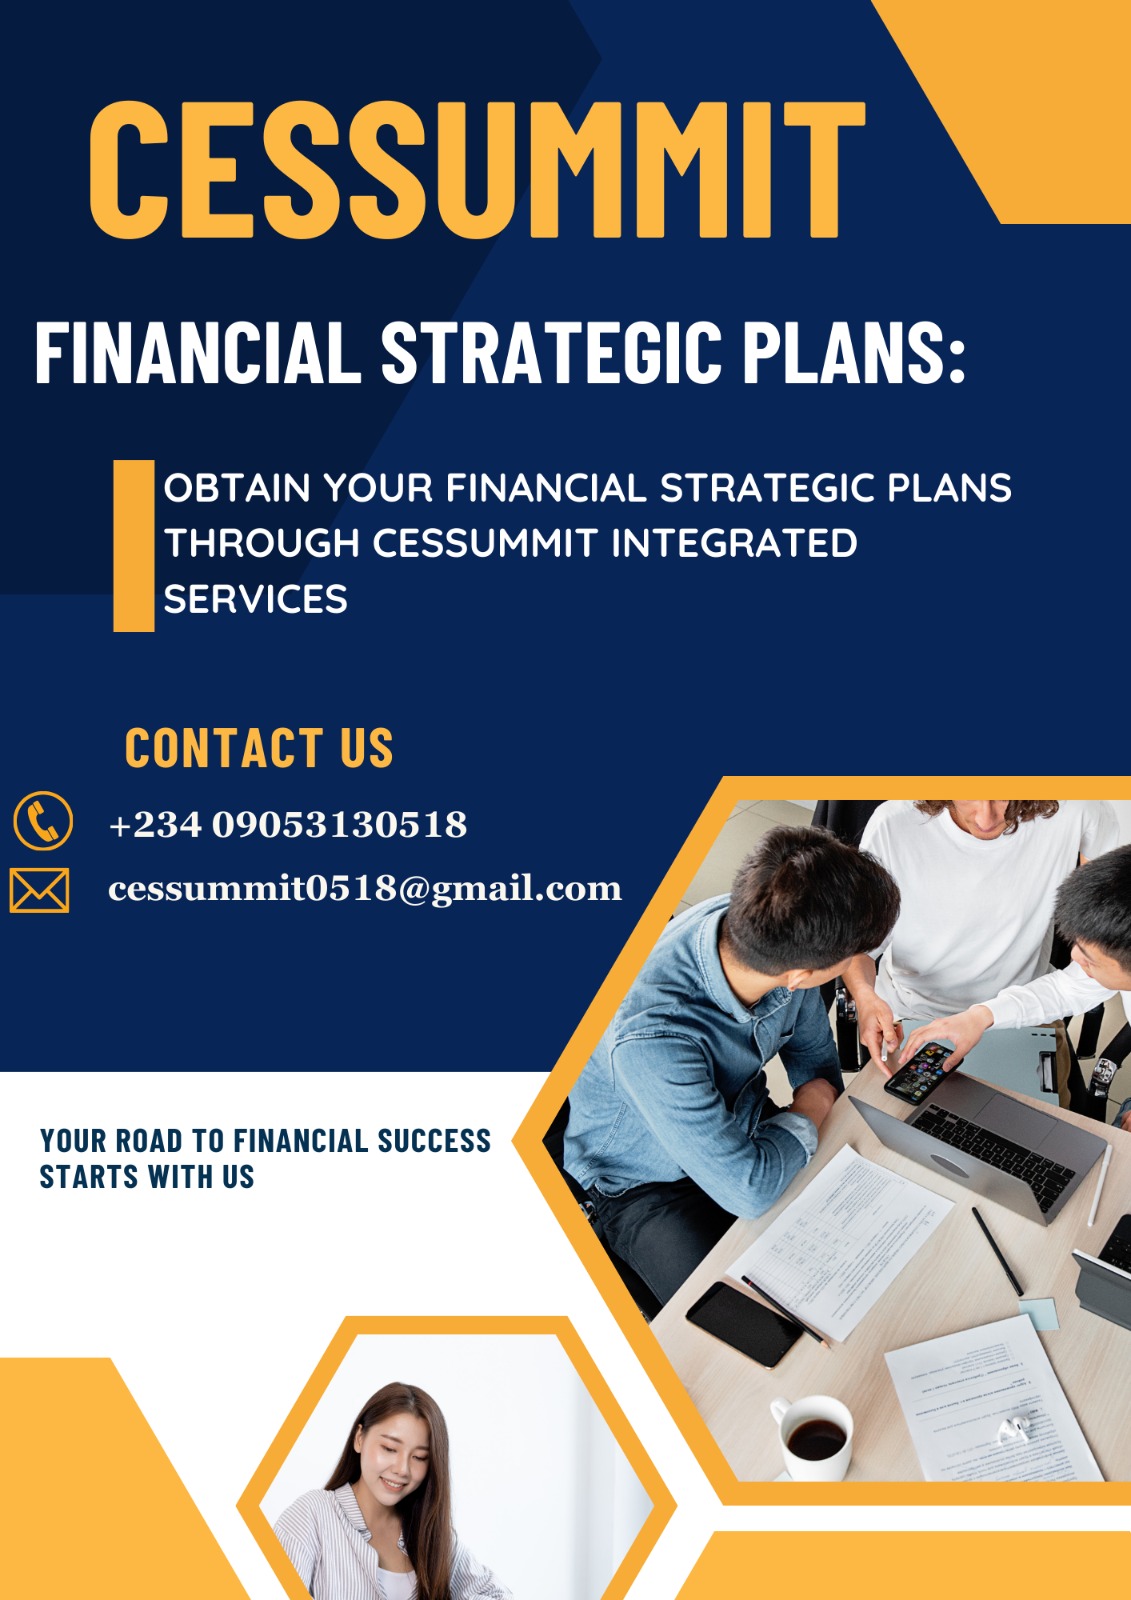 Ask for Approved Financial Strategic Plans From Cessummit.com